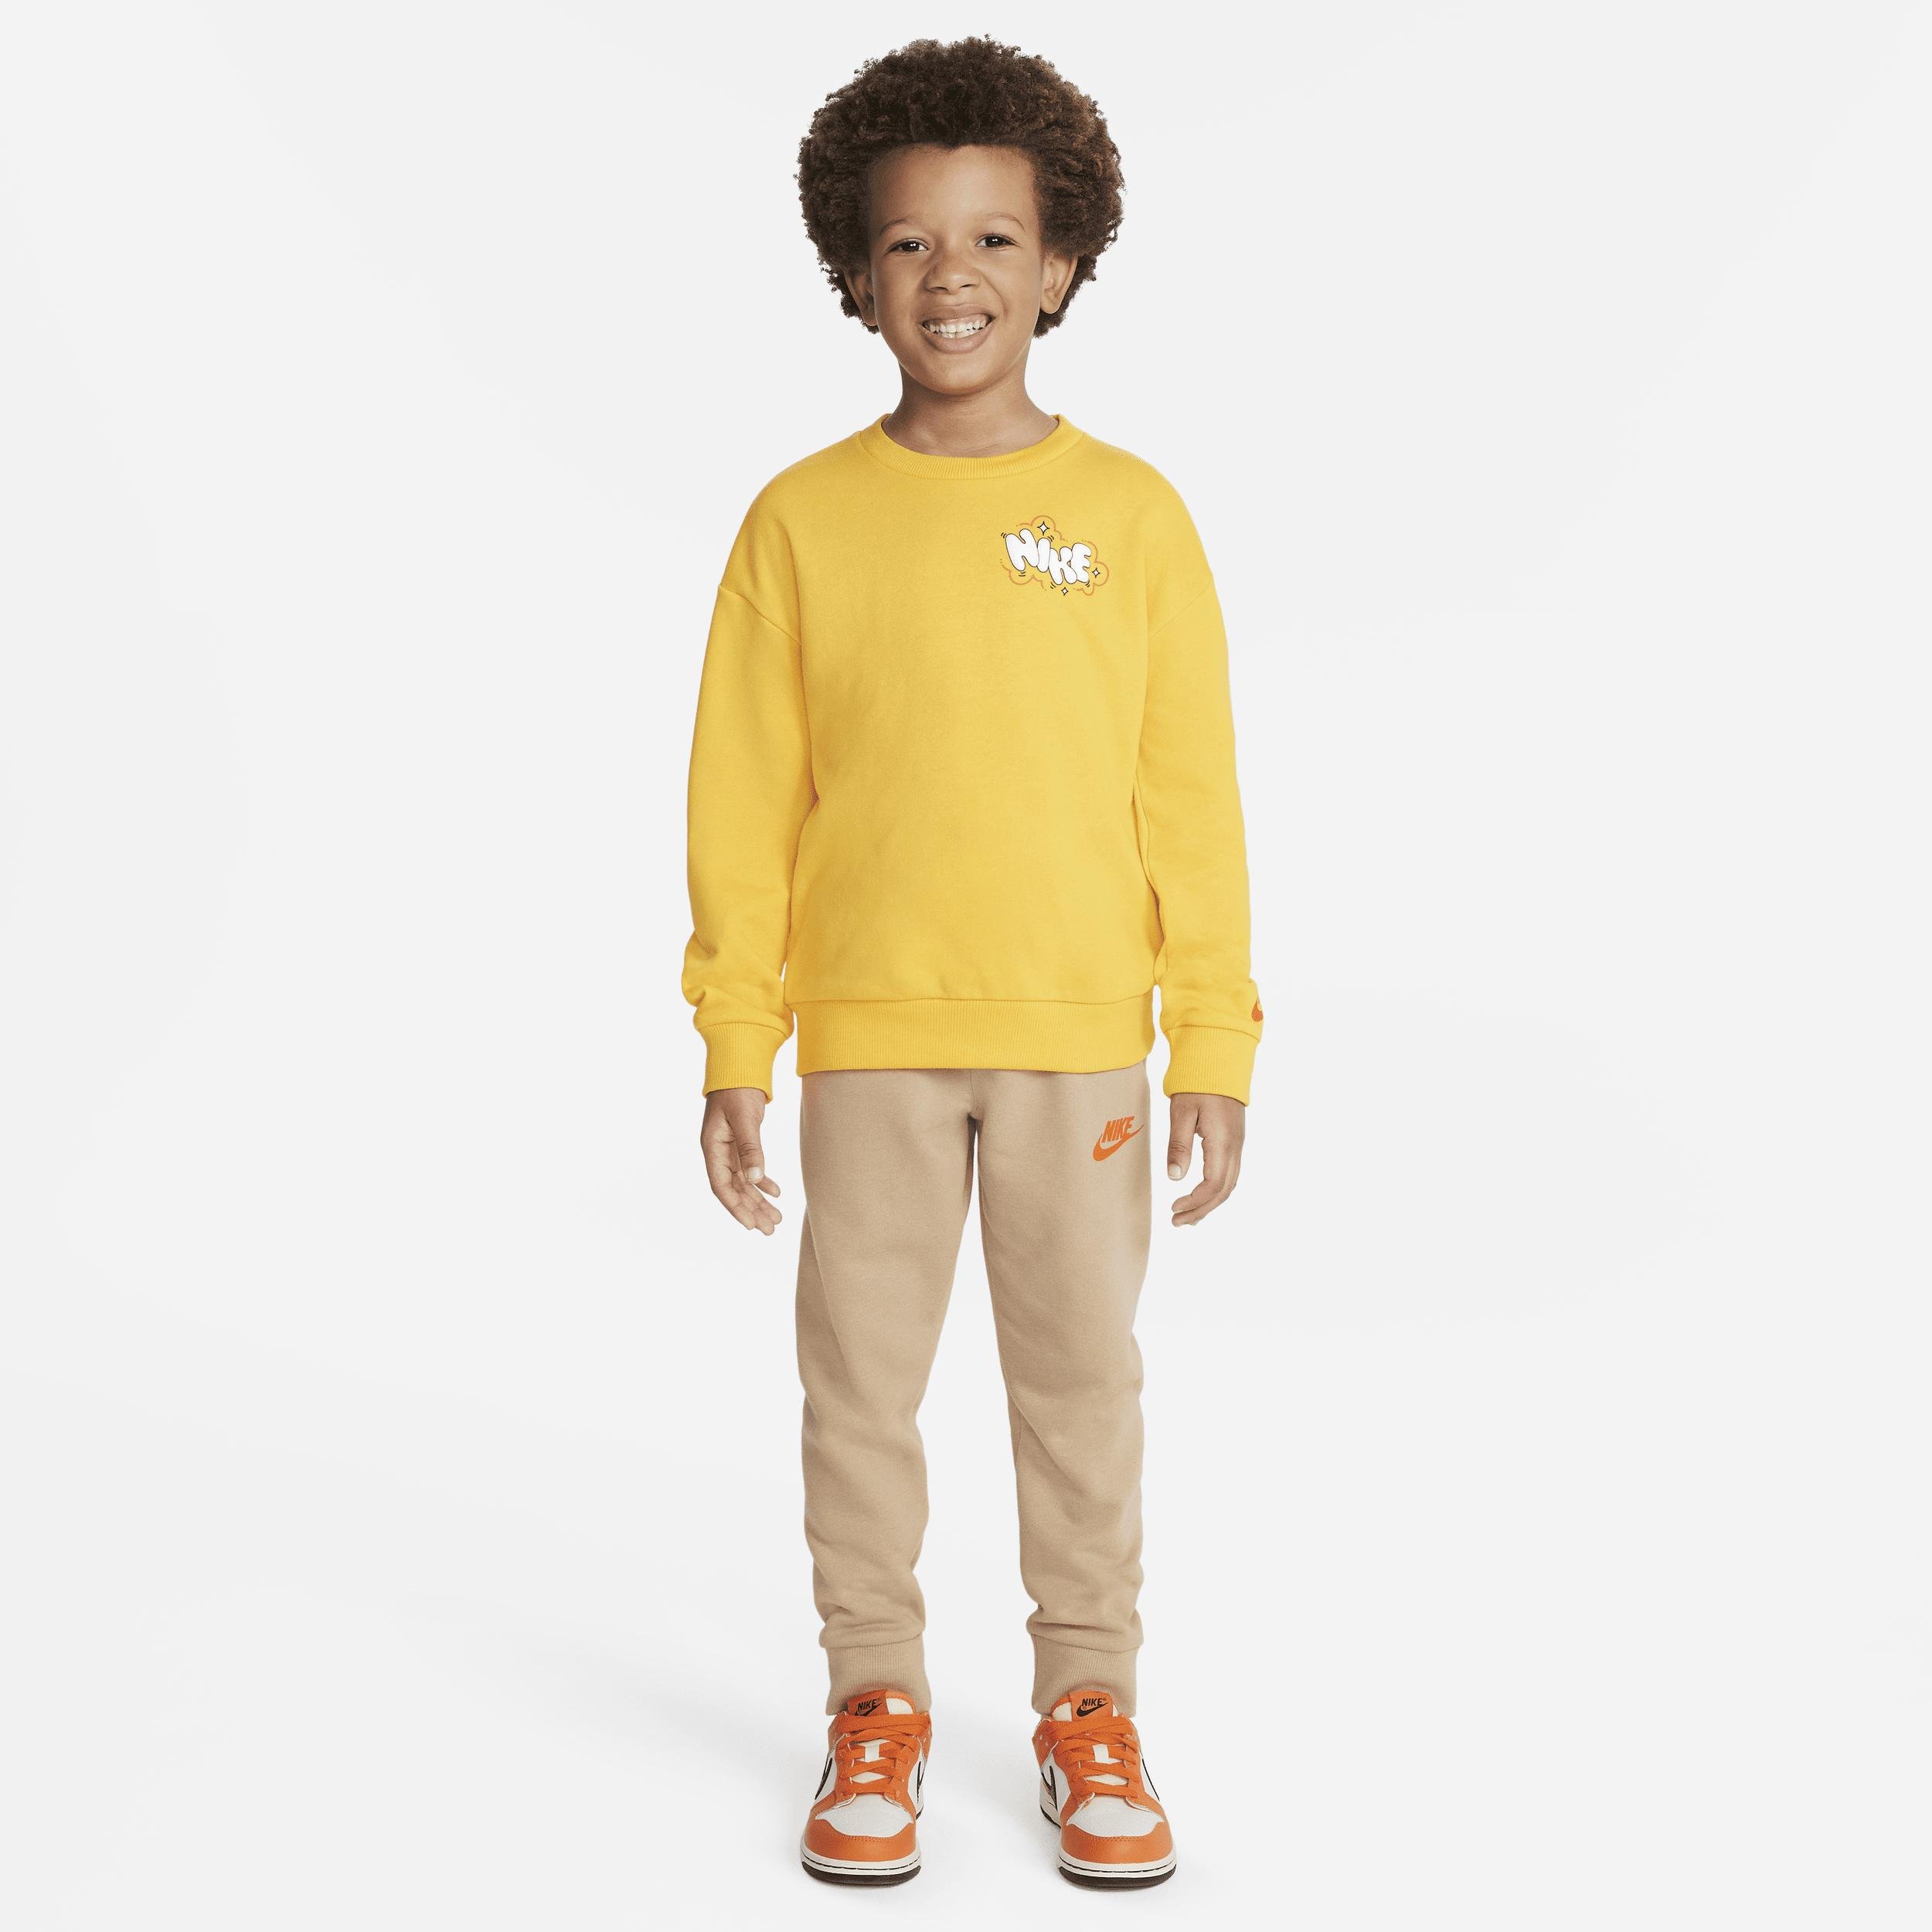 Nike Sportswear Create Your Own Adventure Little Kids' French Terry Graphic Crew Set by NIKE